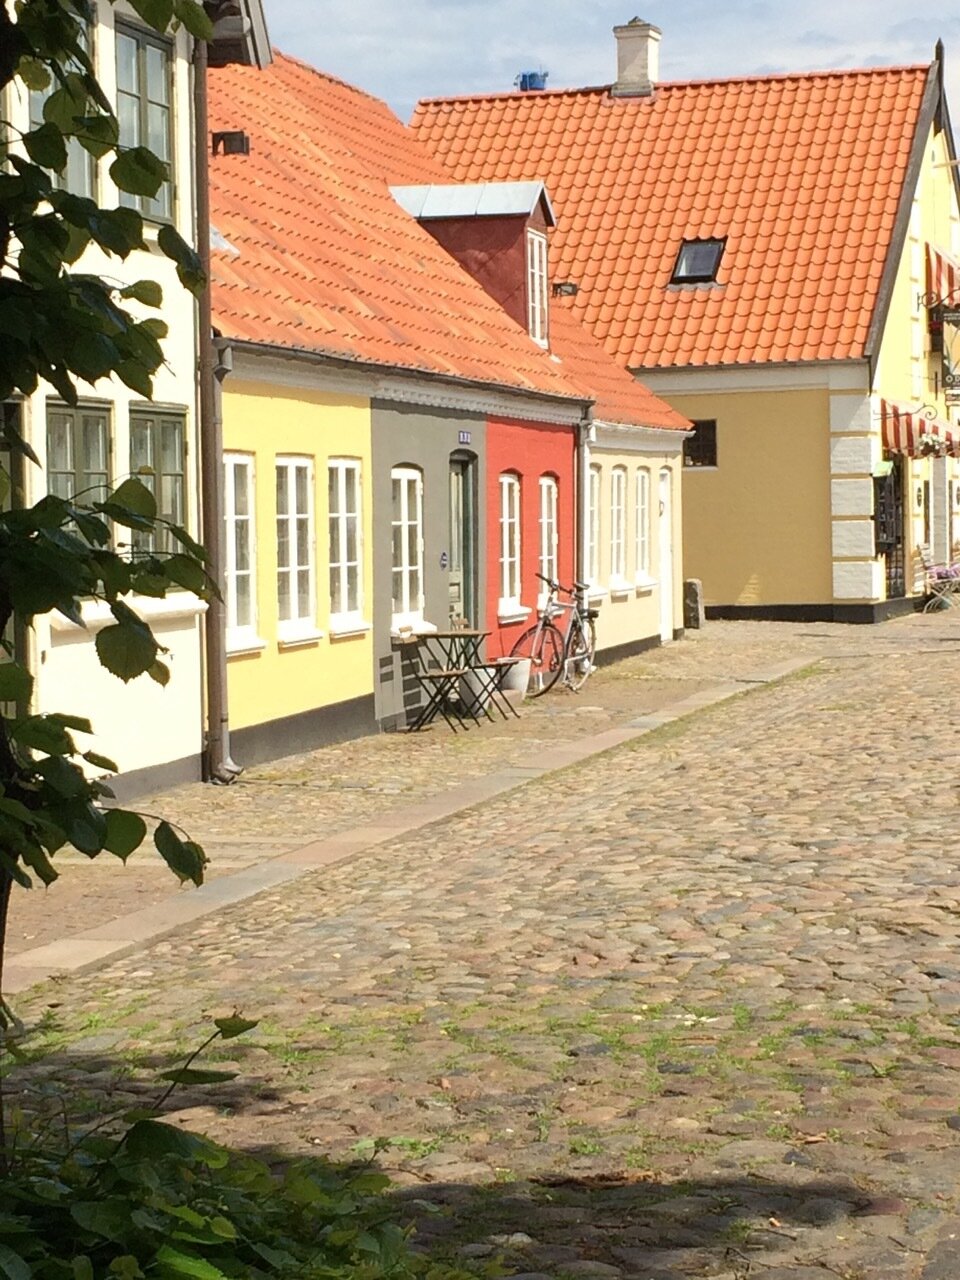  This is the street that one can see out the window of the workshop, which is where fairy tale author Hans Christian Andersen was born in 1805. It is the old, very picturesque part of Odense, the 4th largest city in Denmark. 